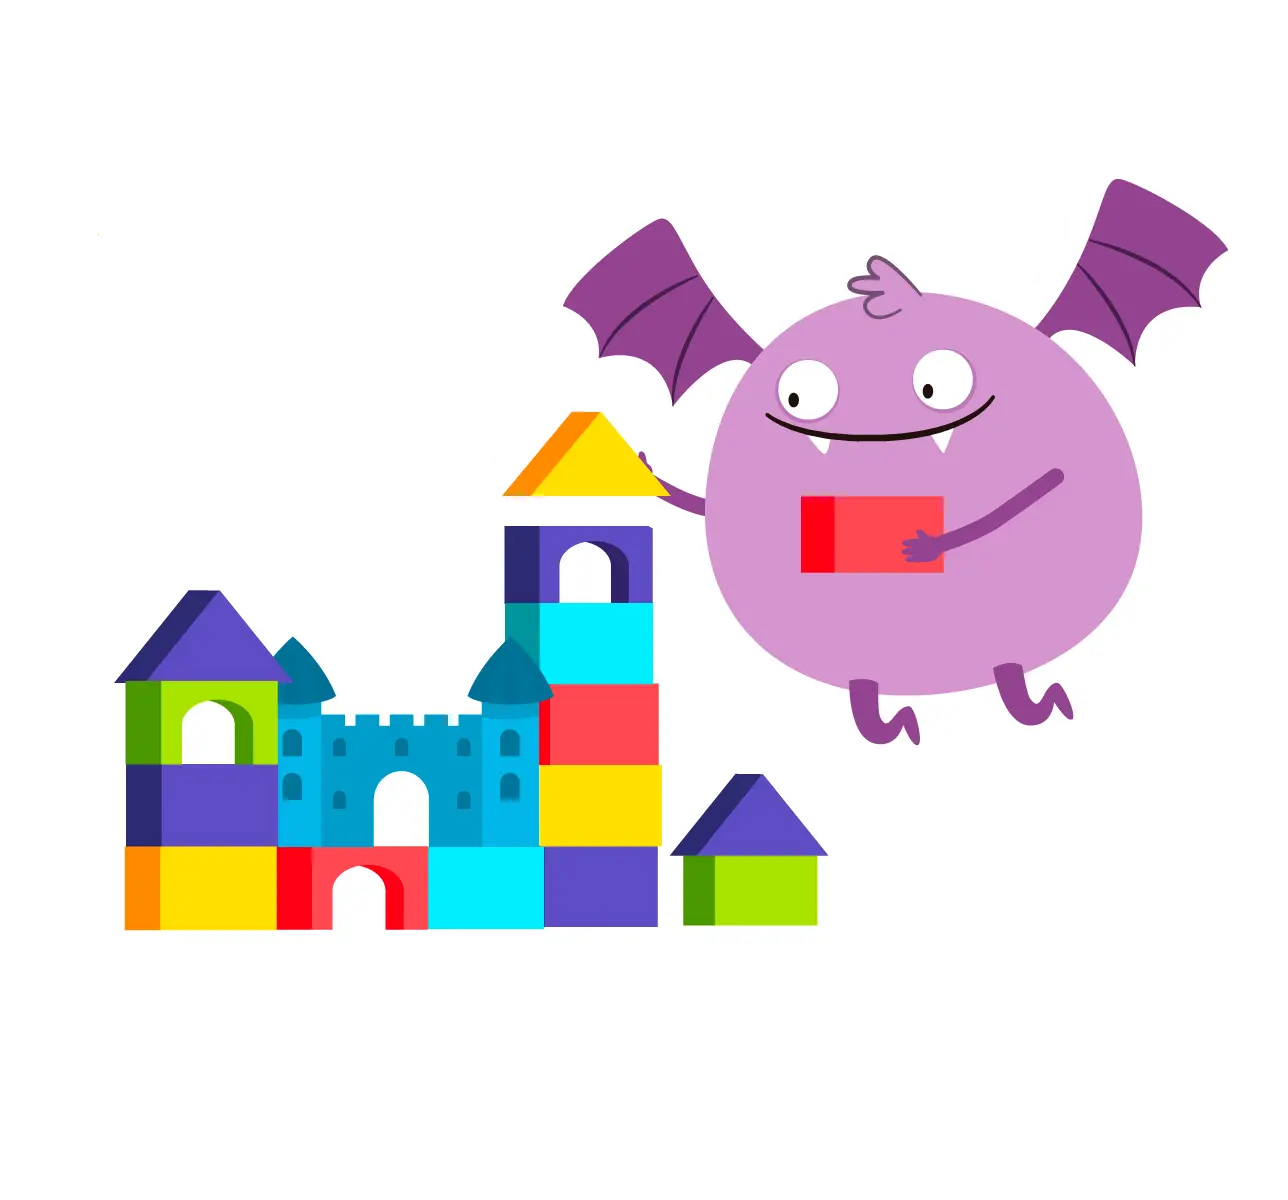 A cute monster playing with building blocks, a metaphor for how kids can build their skills with KidsBeeTV videos and games